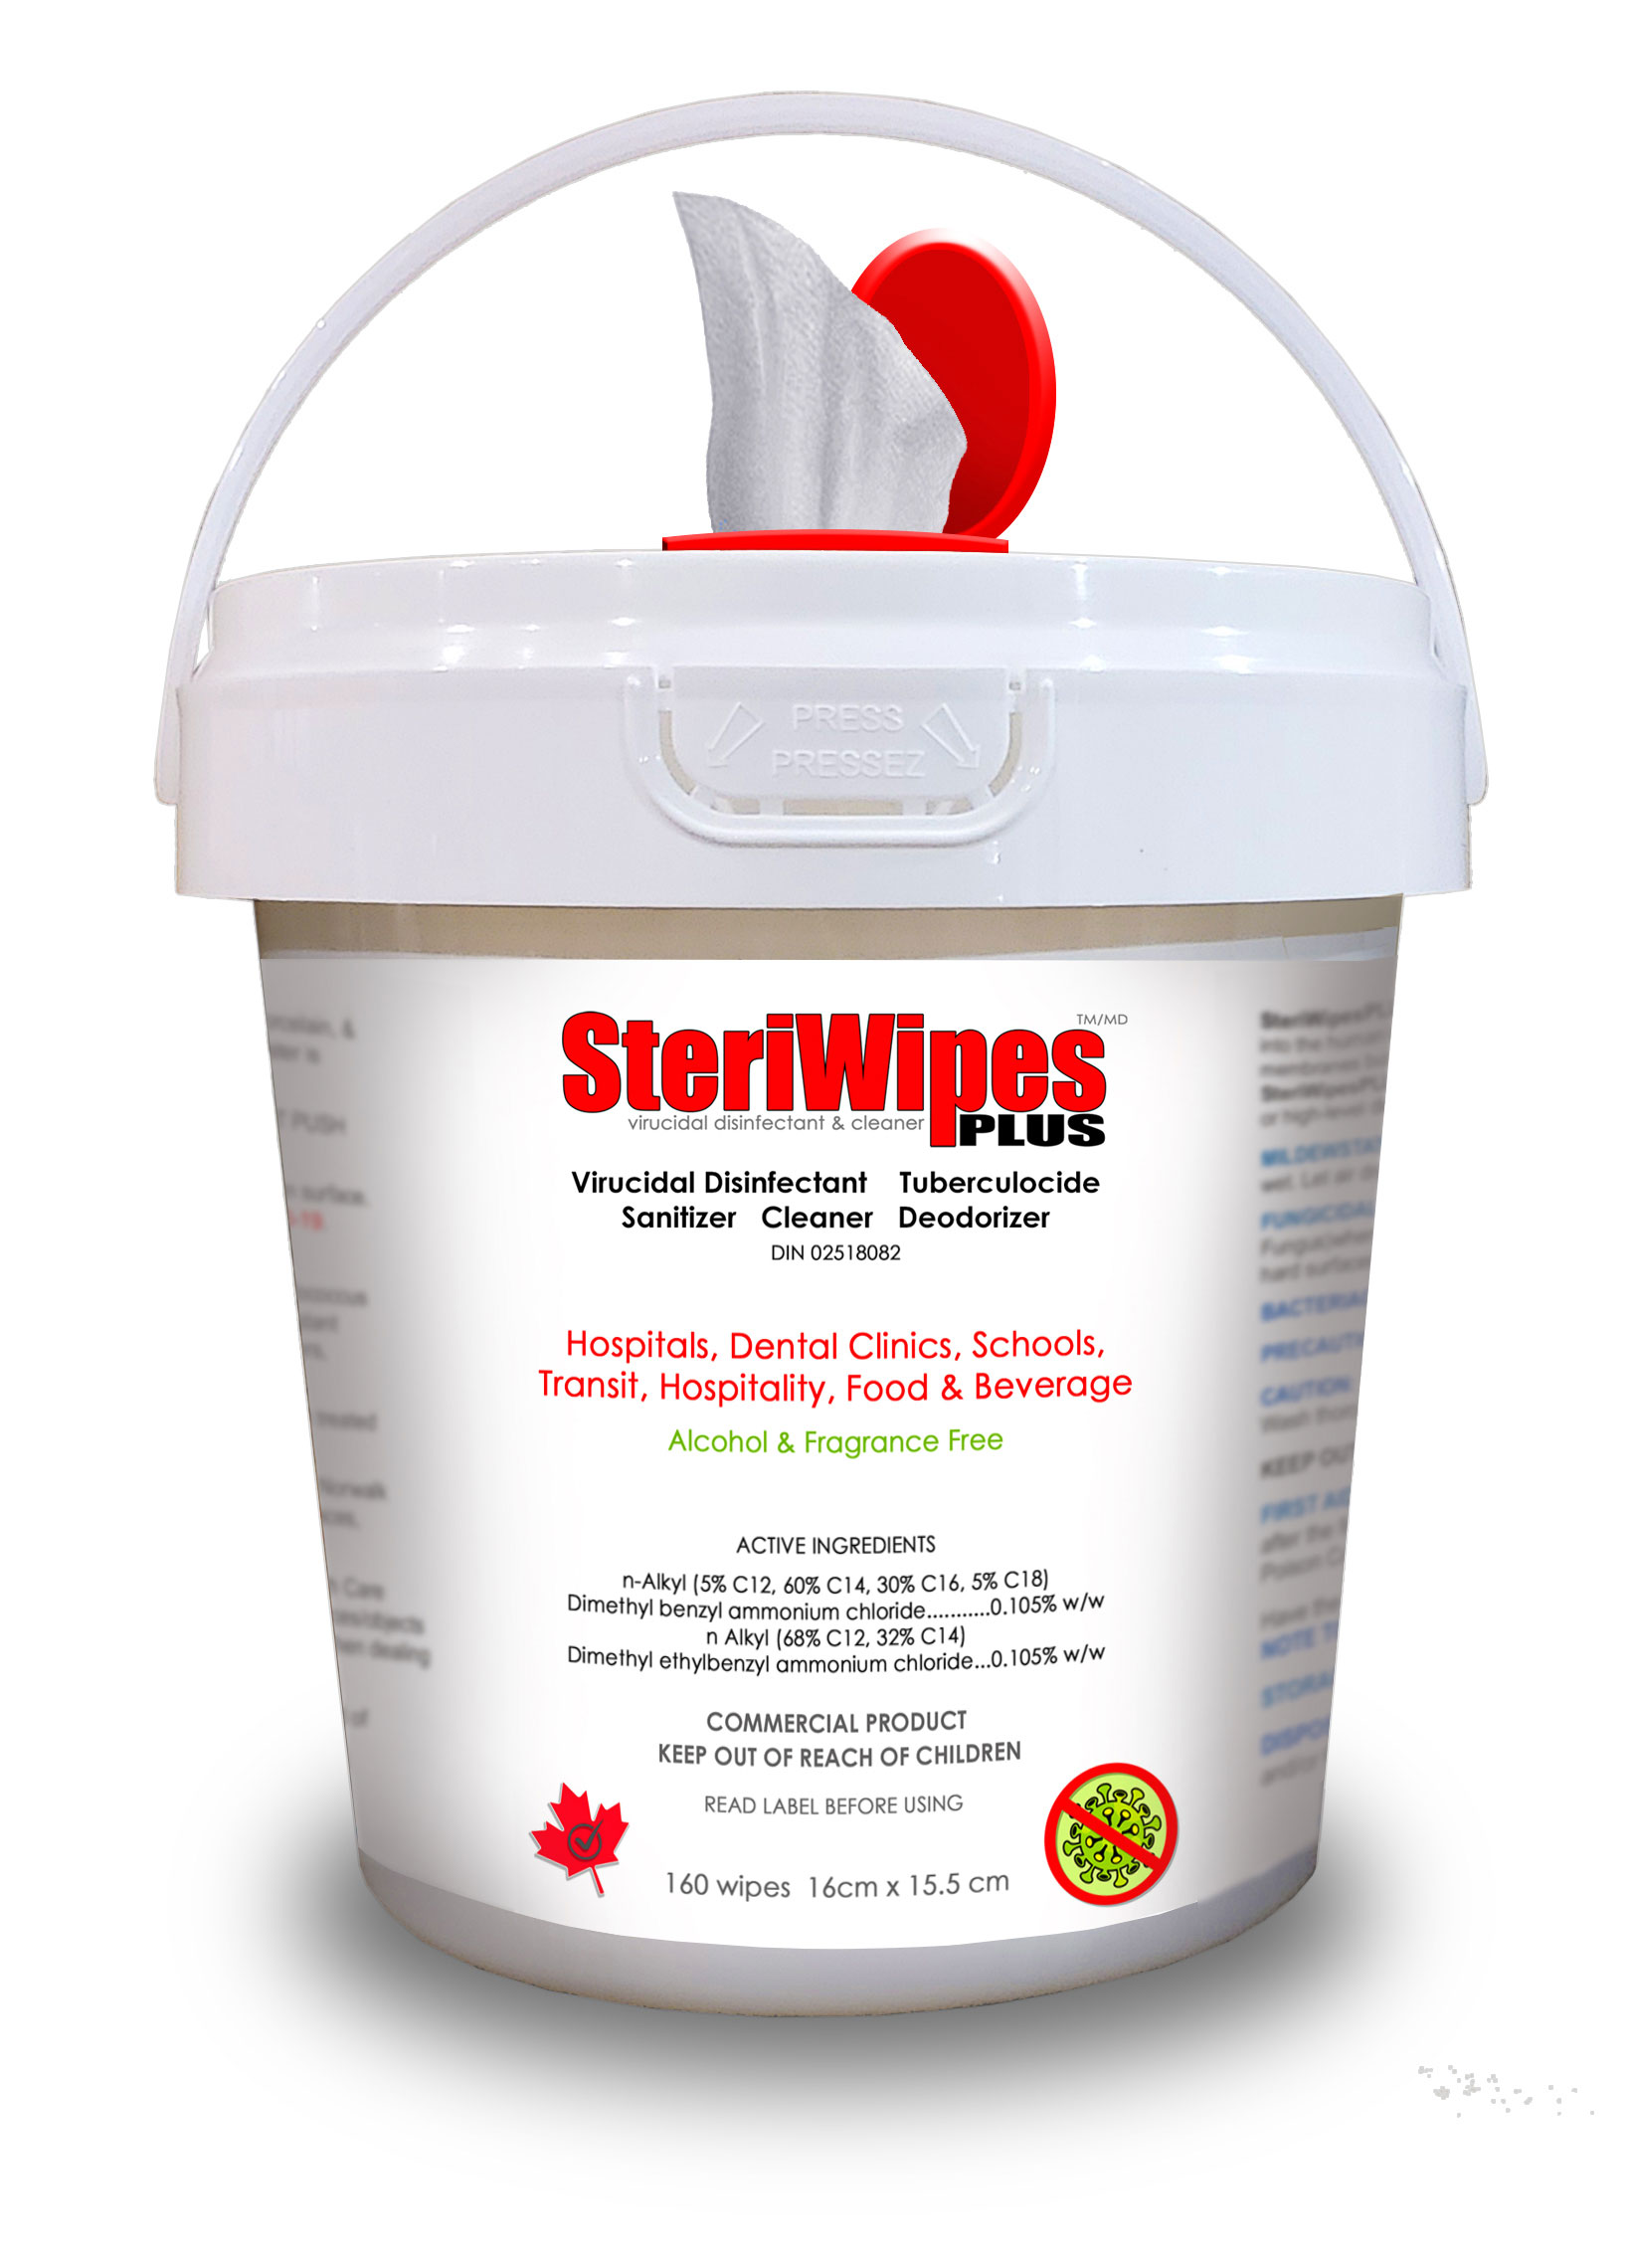 SteriWipes+ Product Image